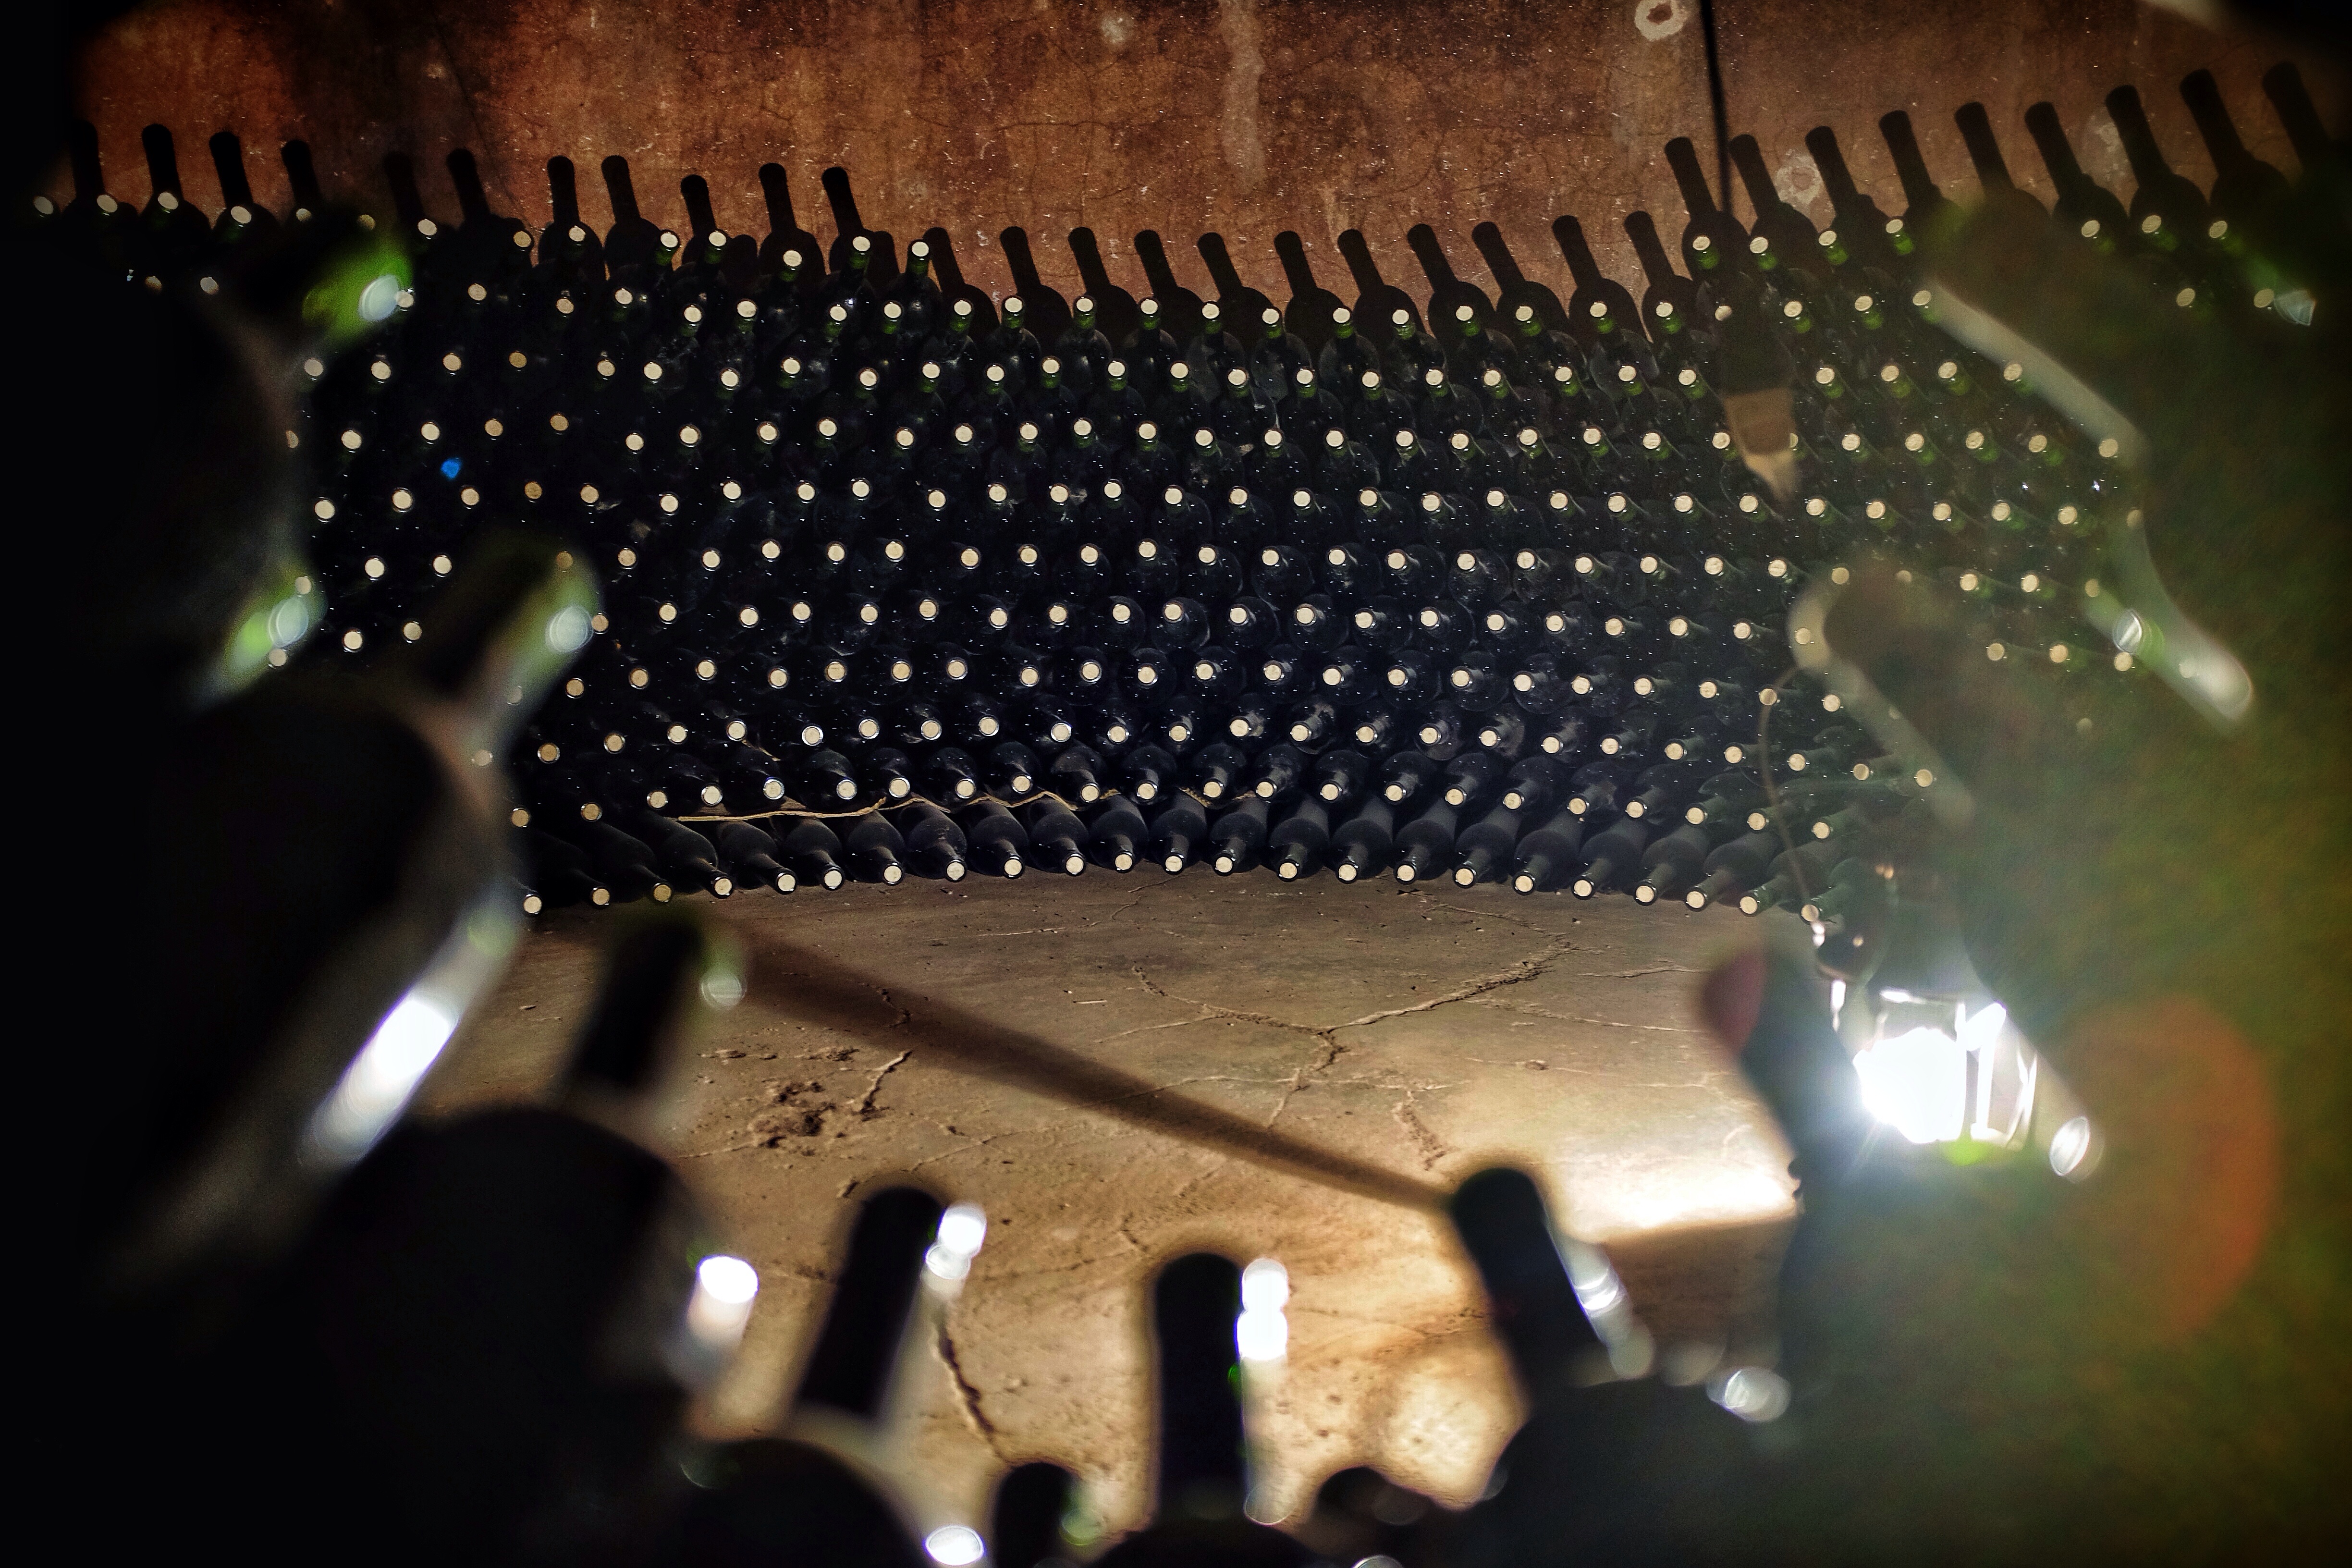 Bottles aging in the old vats of  the Famila di Tommaso bodega (winery).